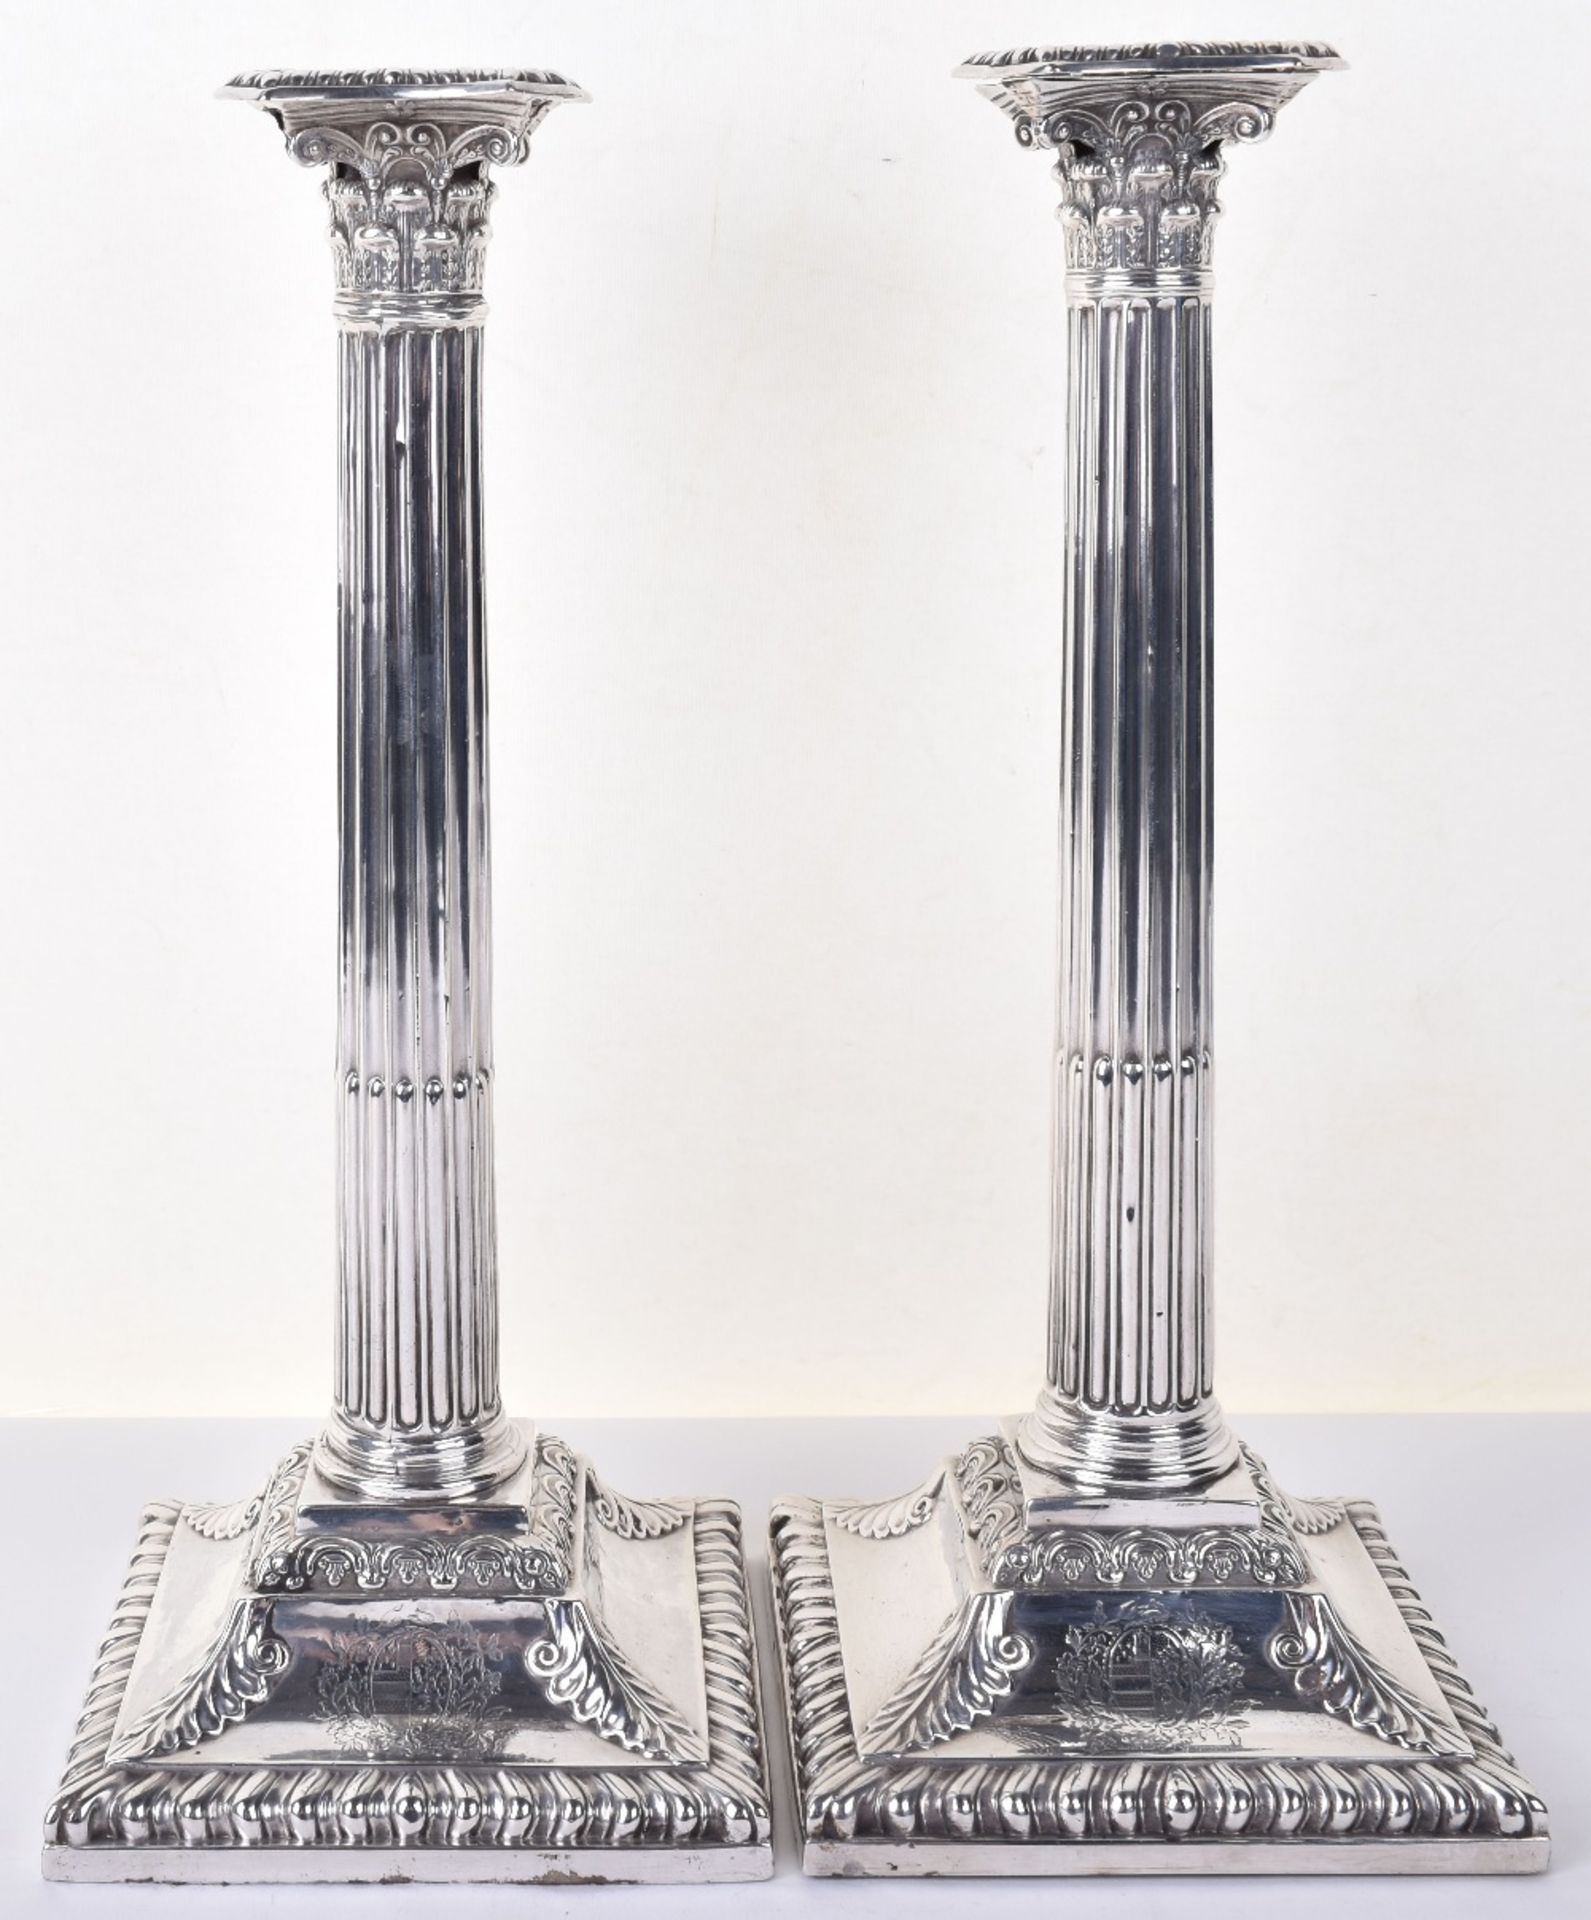 A pair of early George III silver candlesticks, by Eric Romer, London 1766